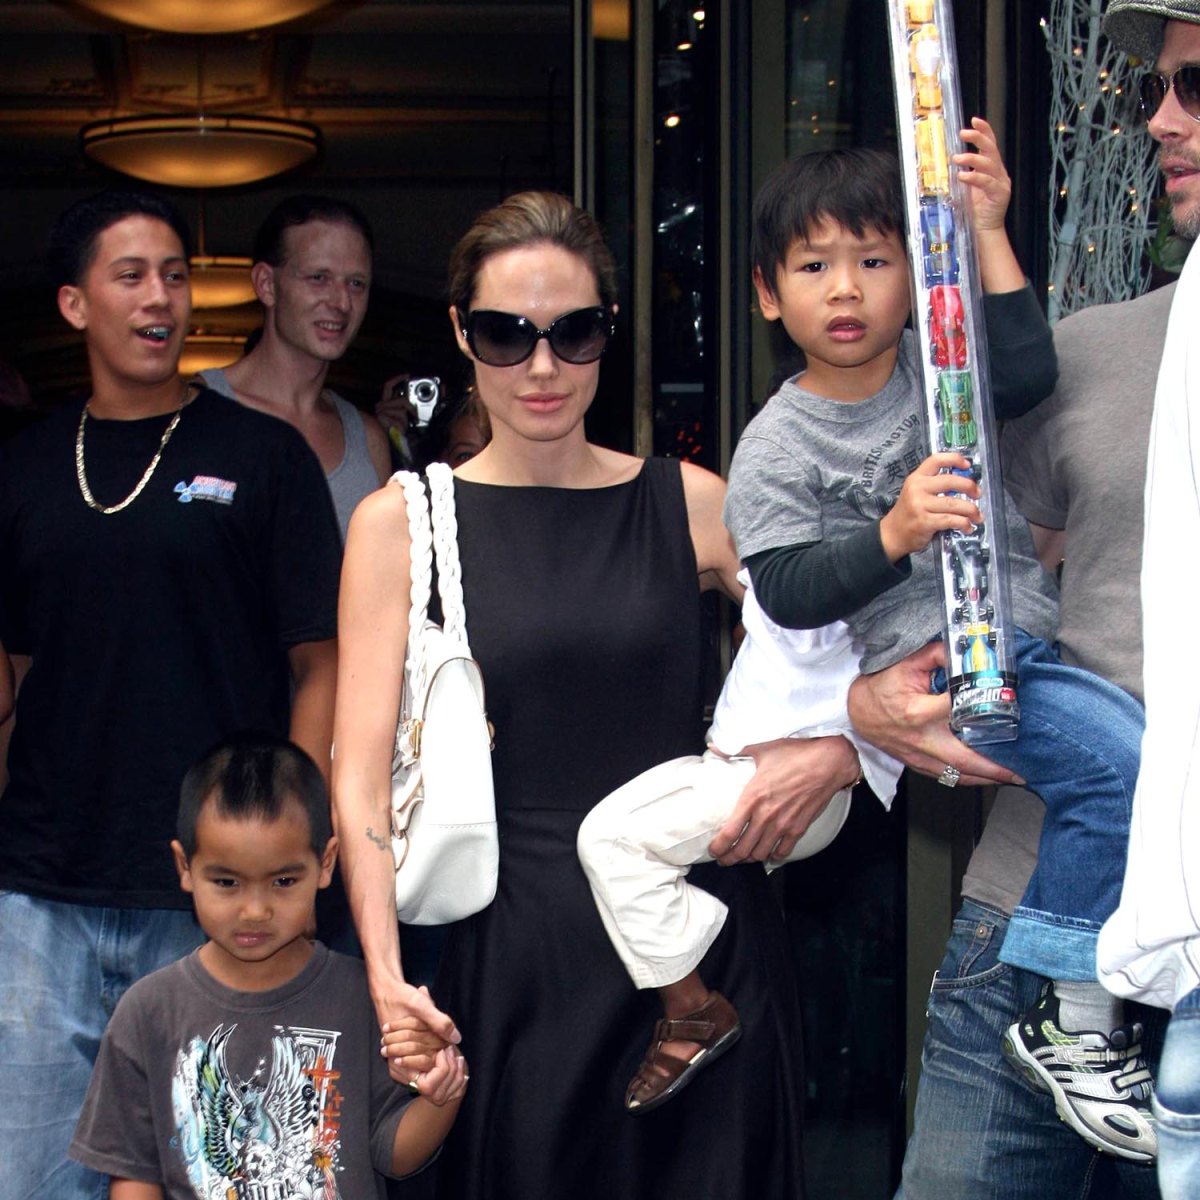 Angelina Jolie and Brad Pitt's son Pax, 19, looks unrecognizable in rare  public outing with famous mom